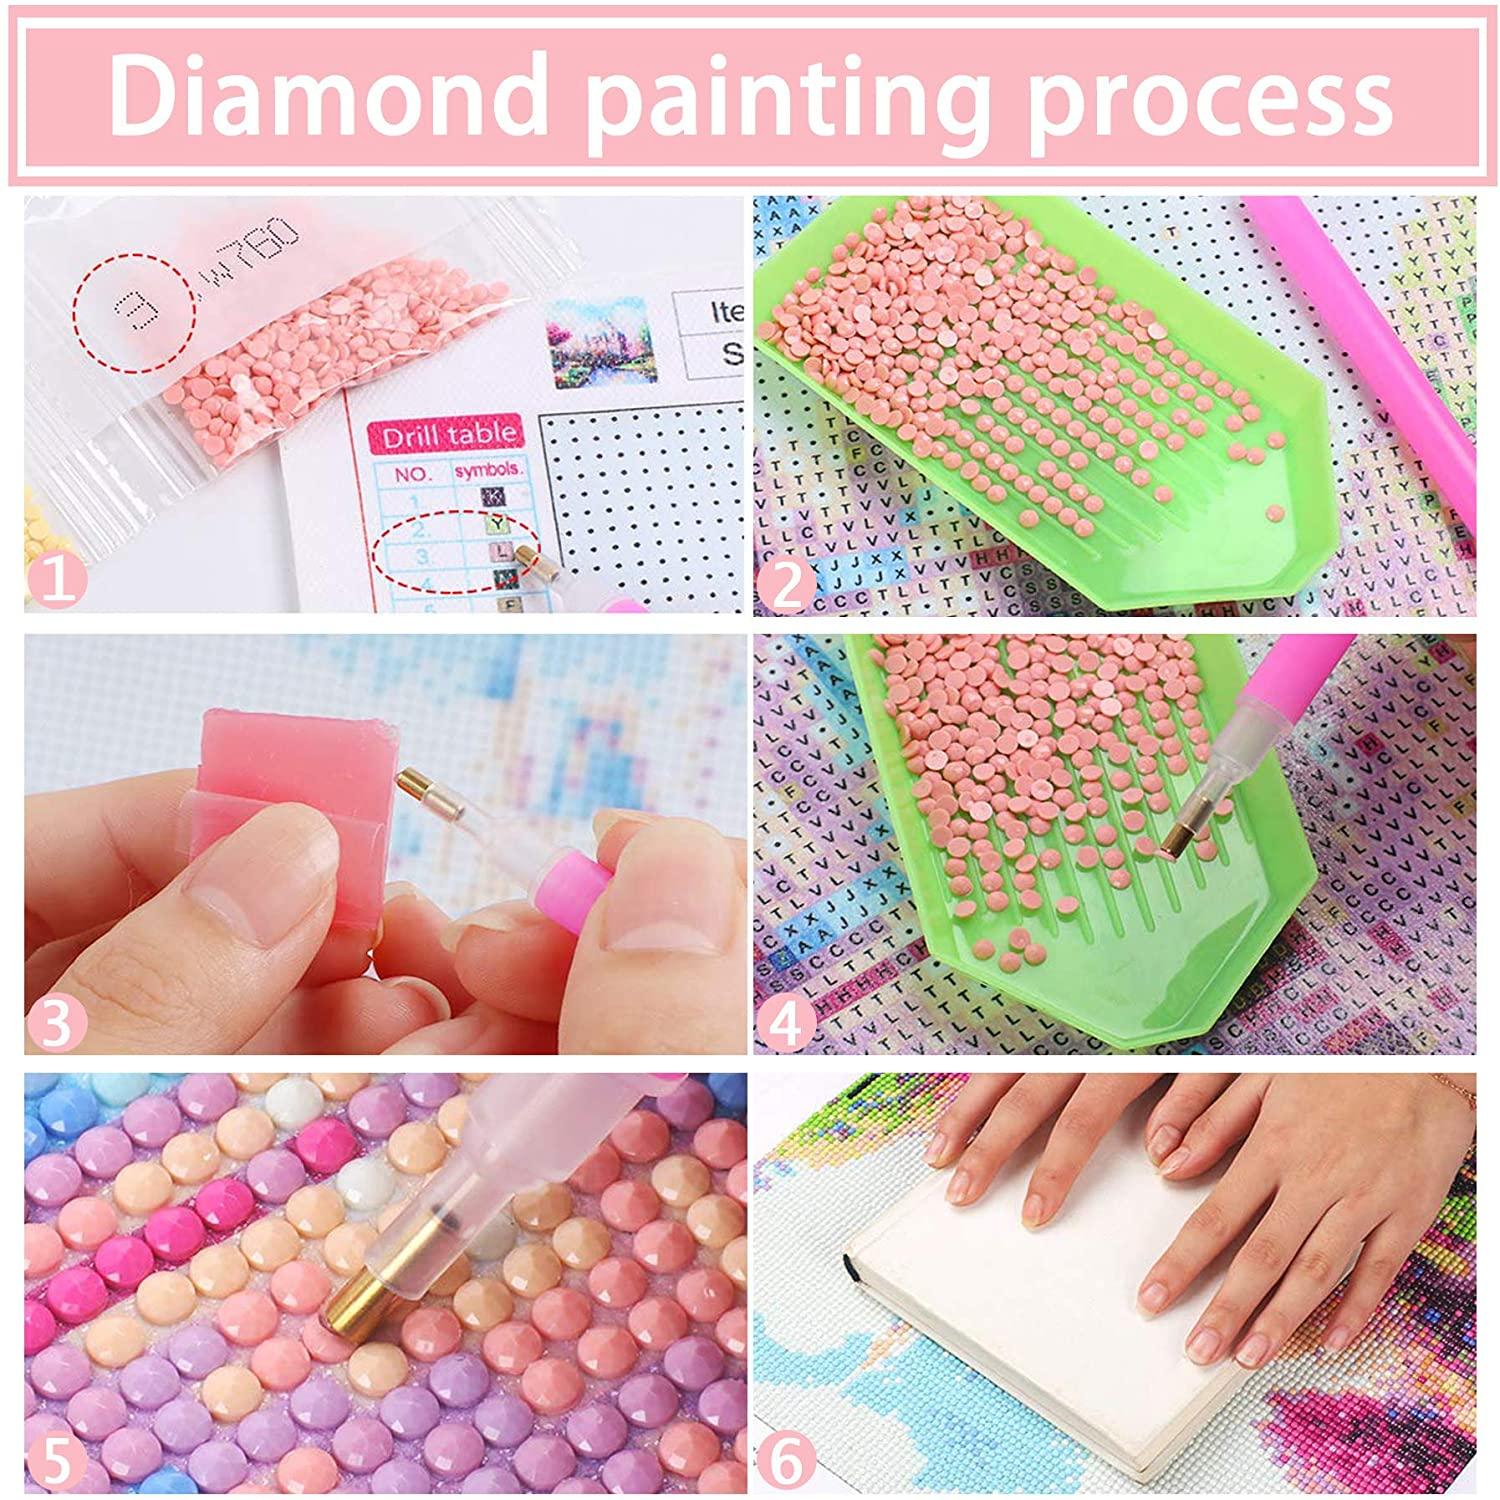 Bimkole 5D Diamond Painting Ballerina Full Drill by Number Kits DIY Rhinestone Pasted 12x16inch